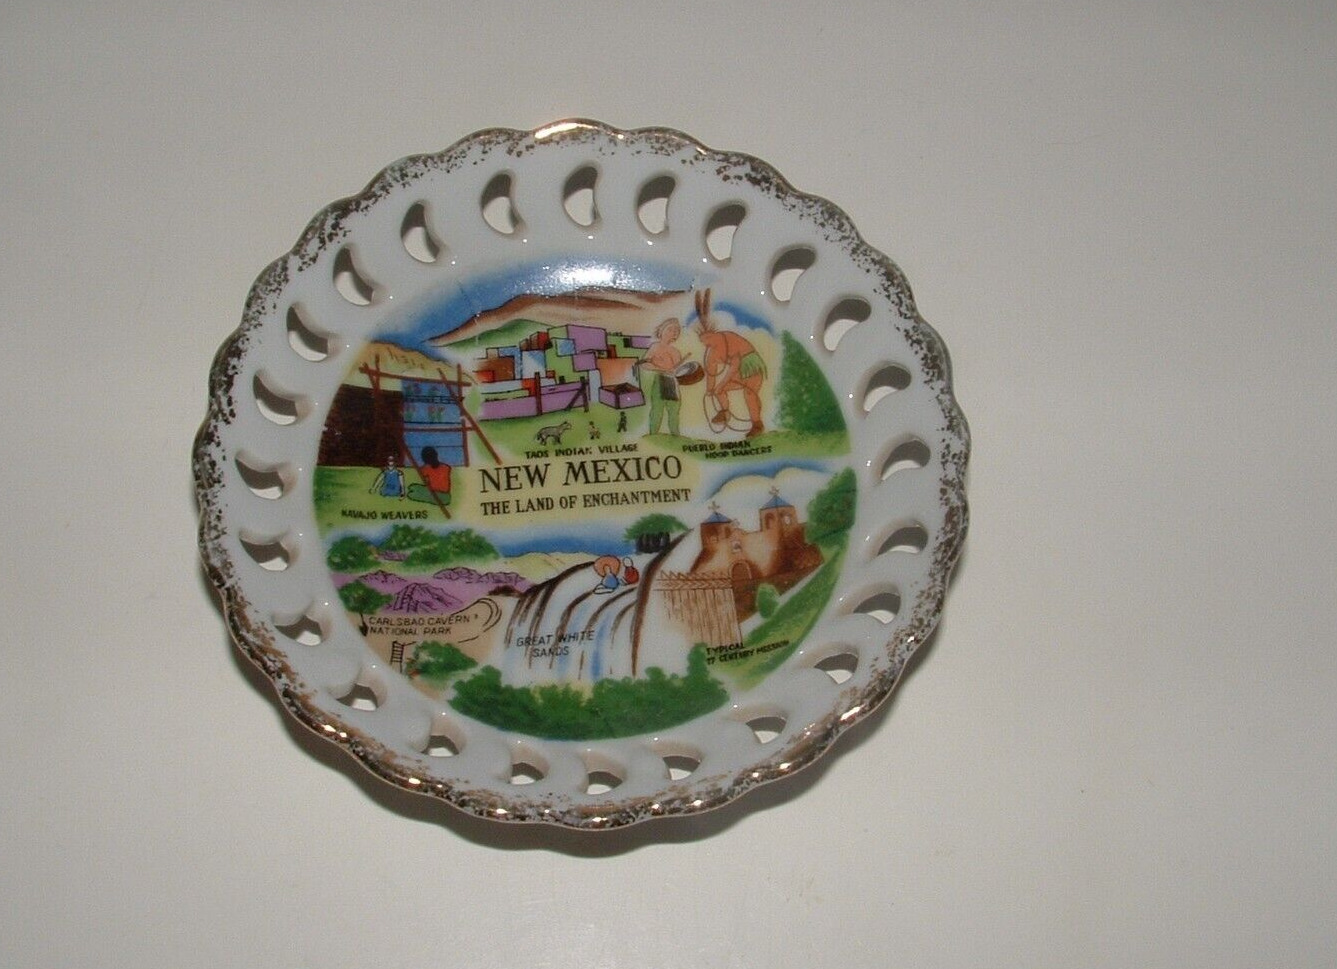 New Mexico Land of Enchantment Plate ( White Sands, Carlsbad, Etc. ), pre-owned